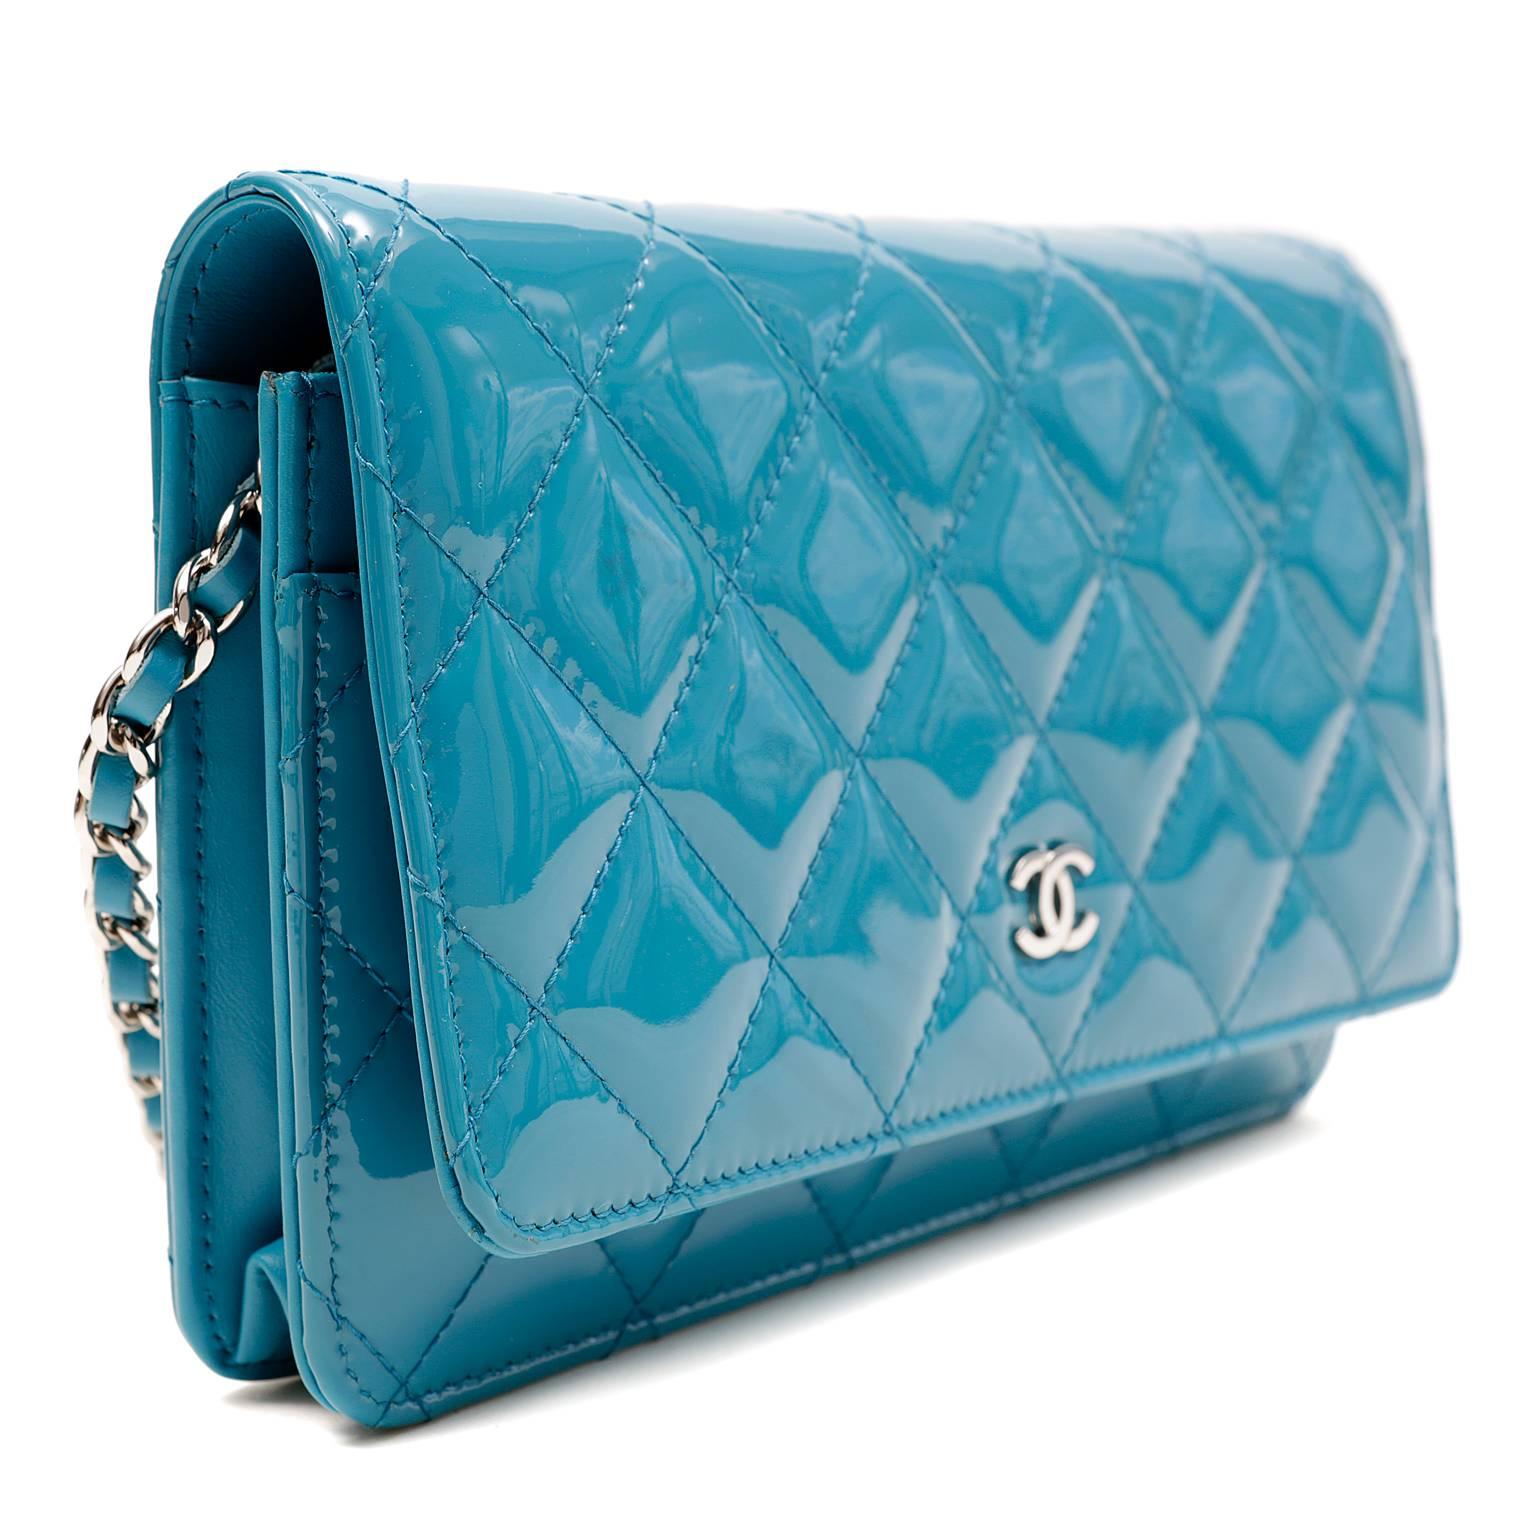 Blue Chanel Turquoise Patent Leather Wallet on a Chain WOC- Silver HW